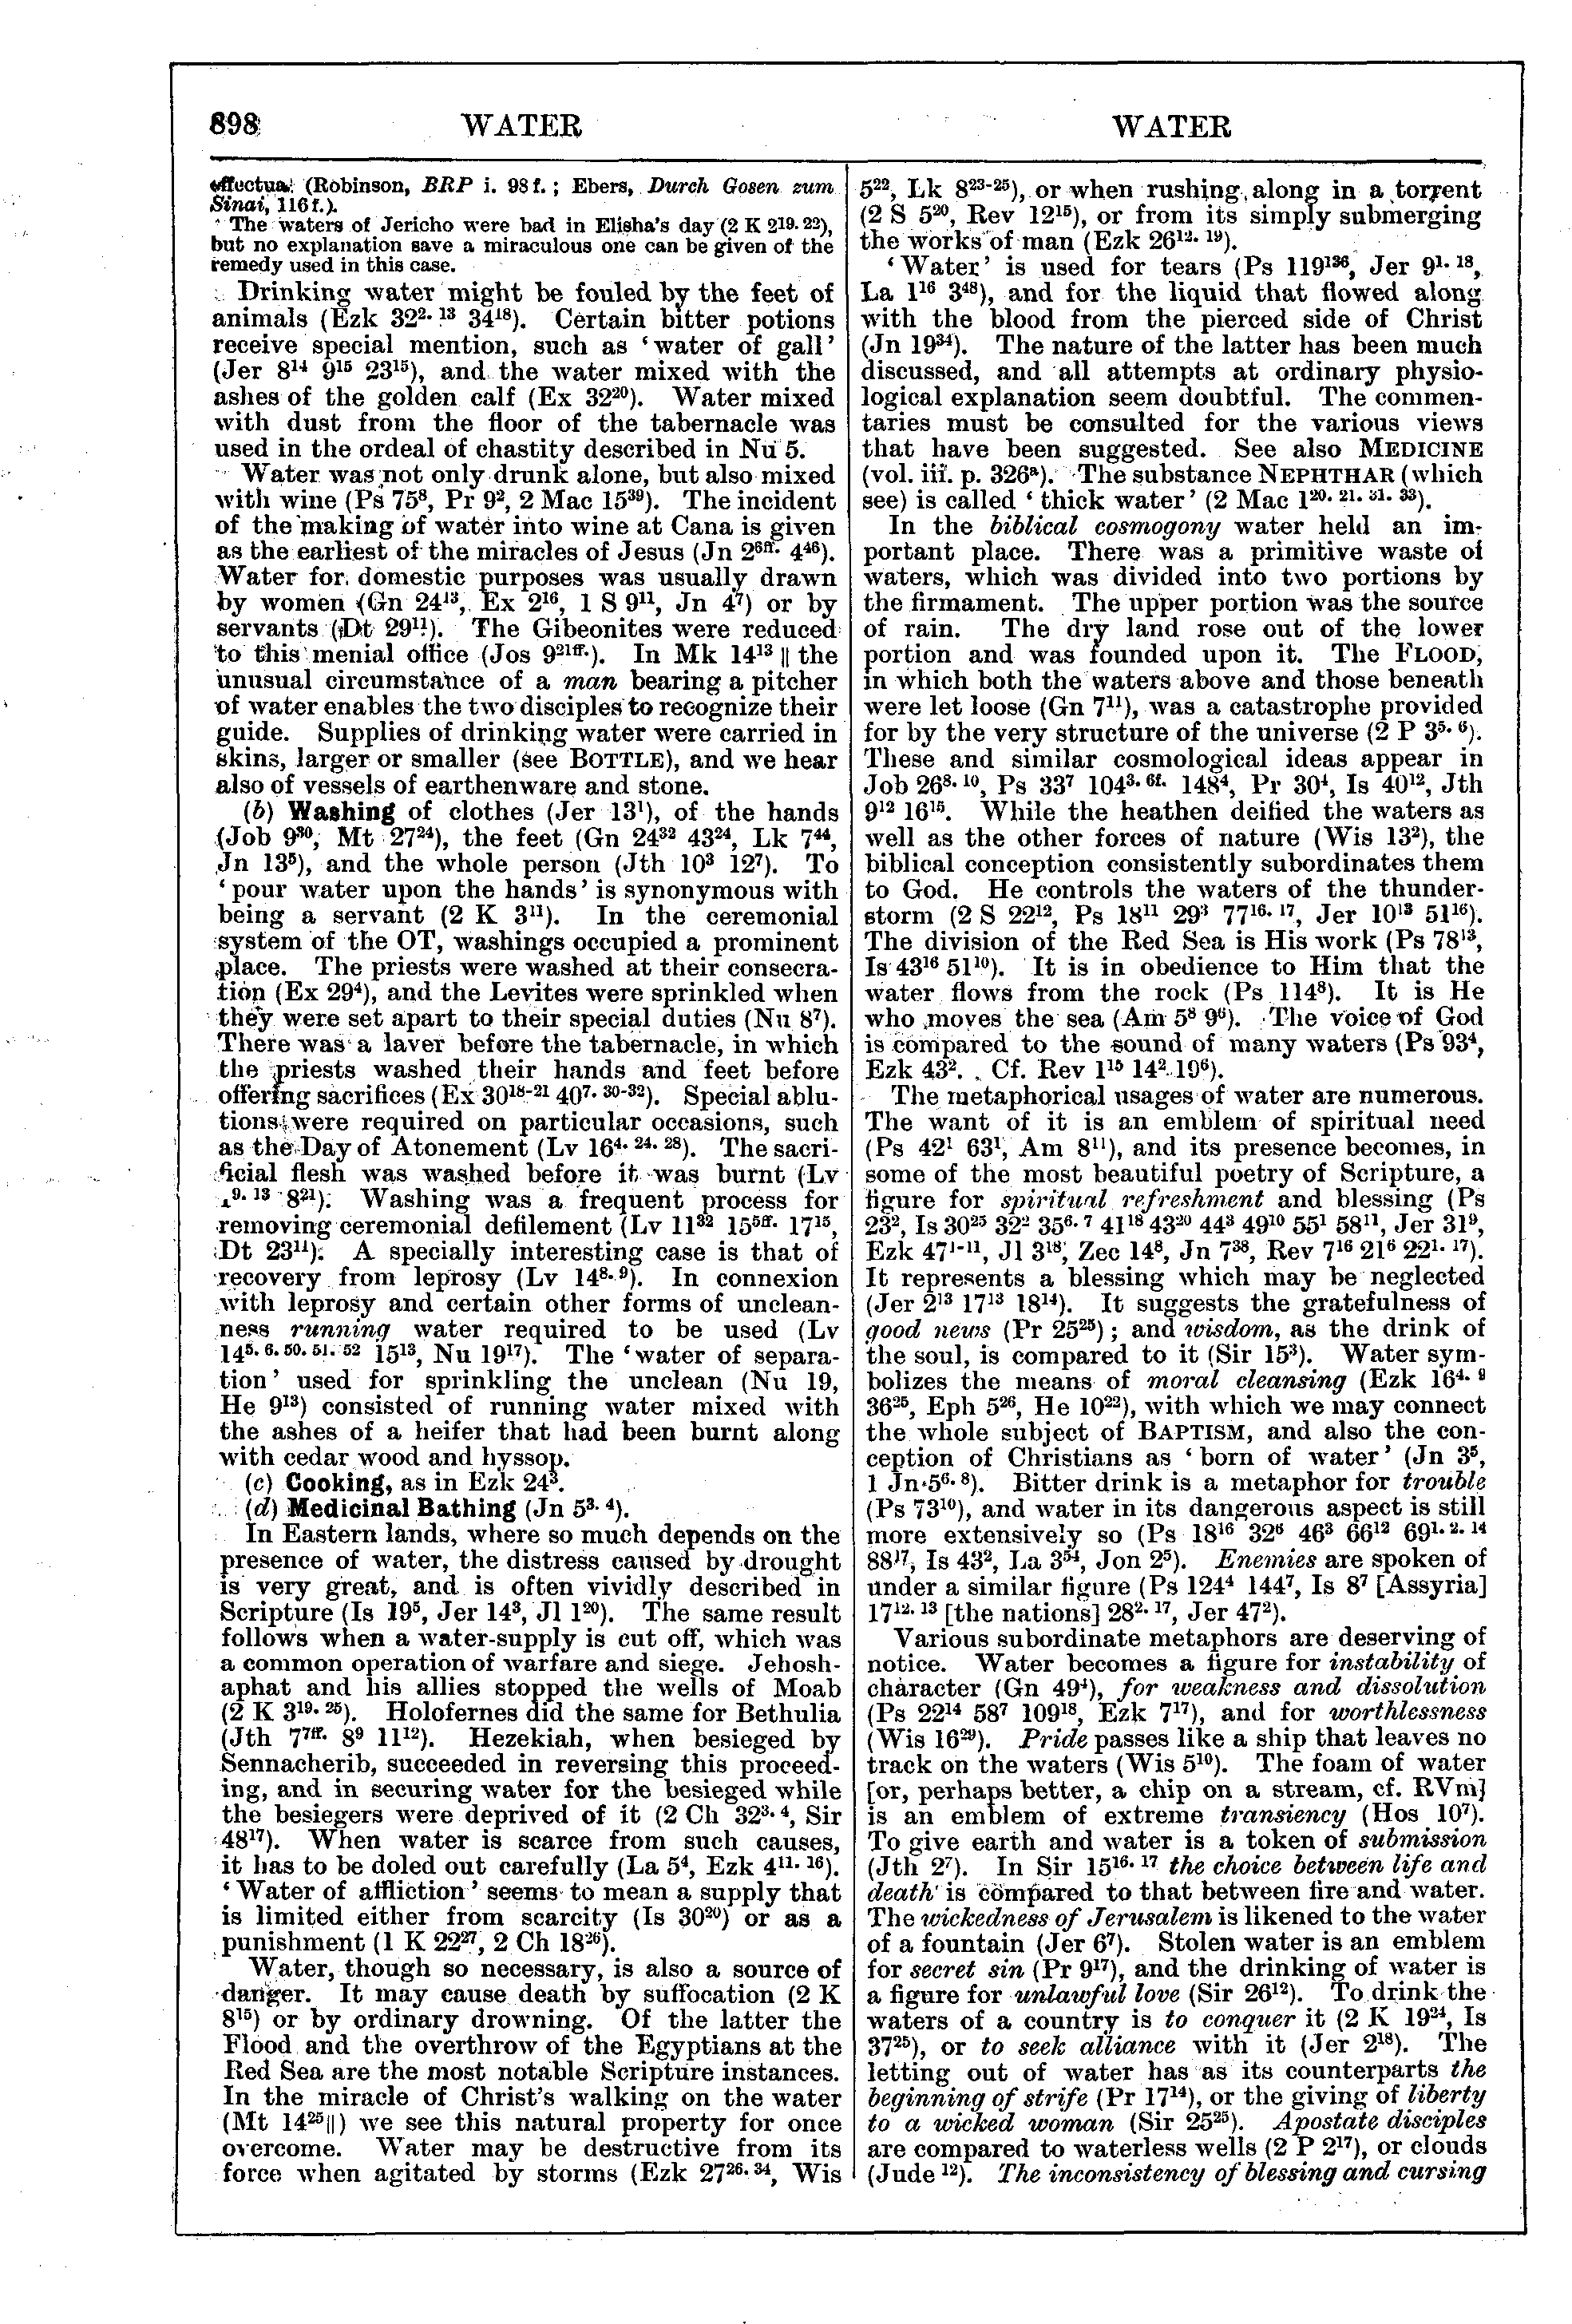 Image of page 898